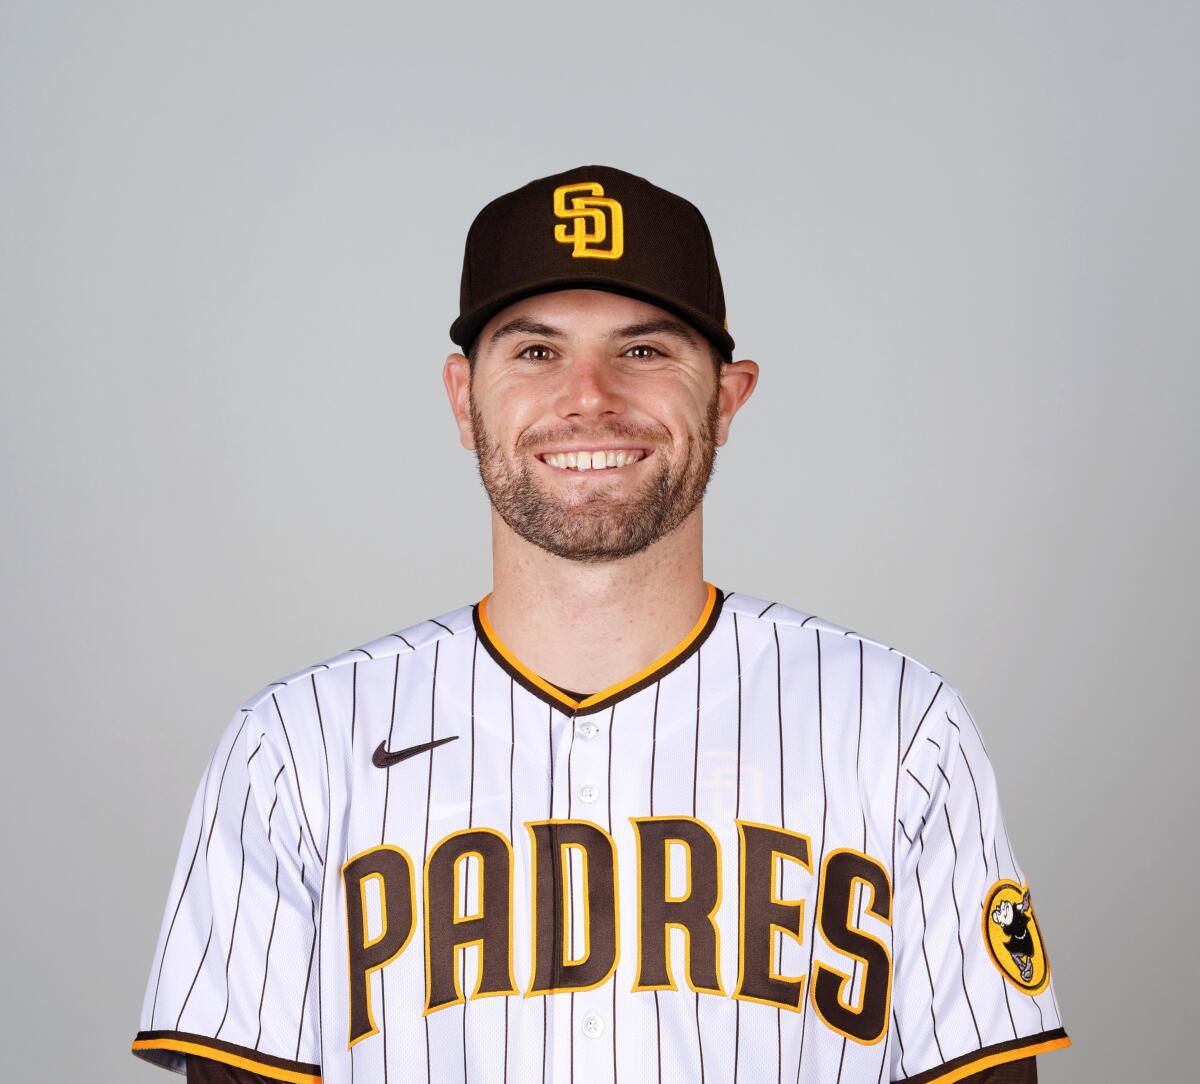 Concept Ideas for the 2016 Padres Uniforms - Gaslamp Ball